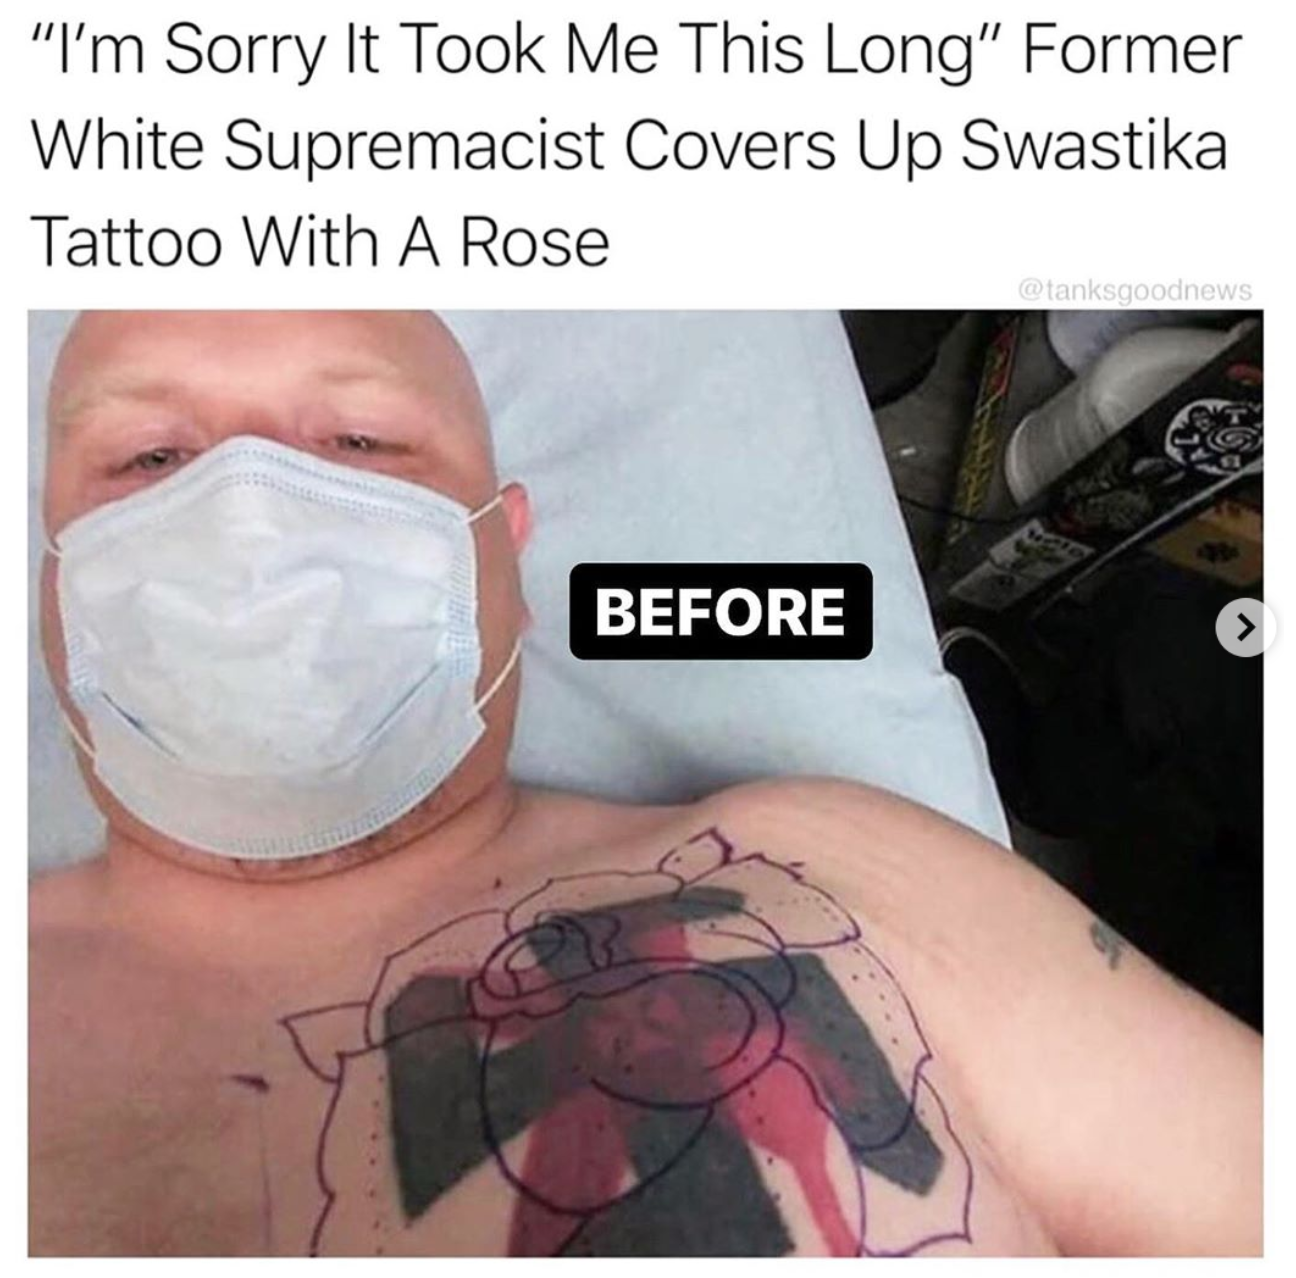 "I'm Sorry It Took Me This Long" Former White Supremacist Covers Up Swastika Tattoo With A Rose tank goodnews Before